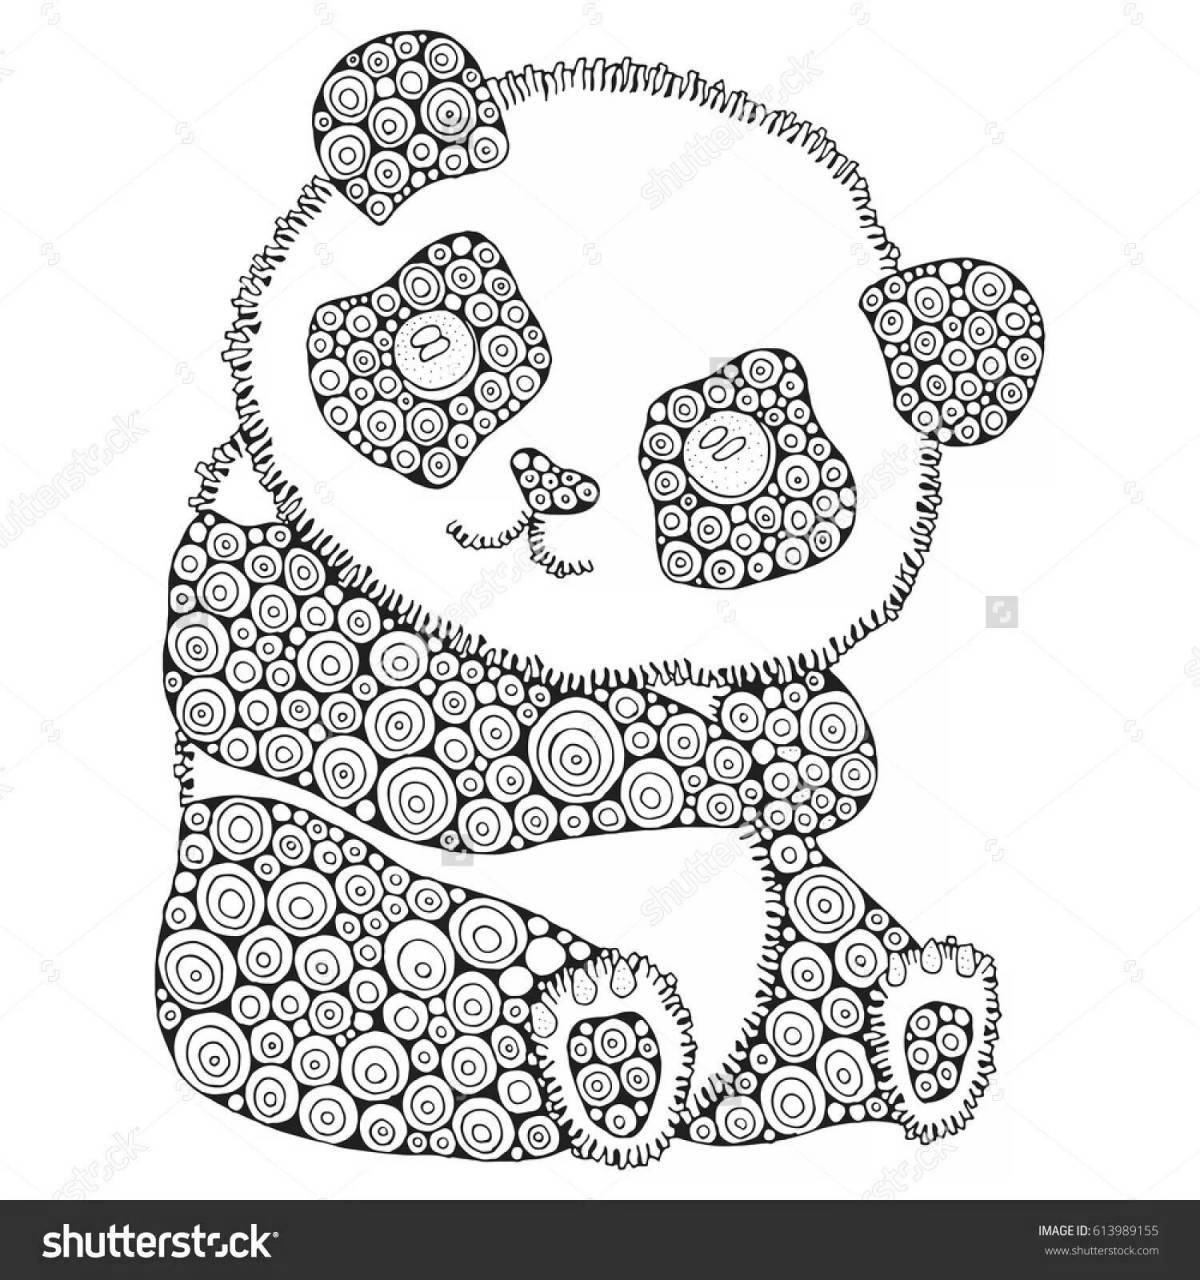 Exciting anti-stress coloring bear